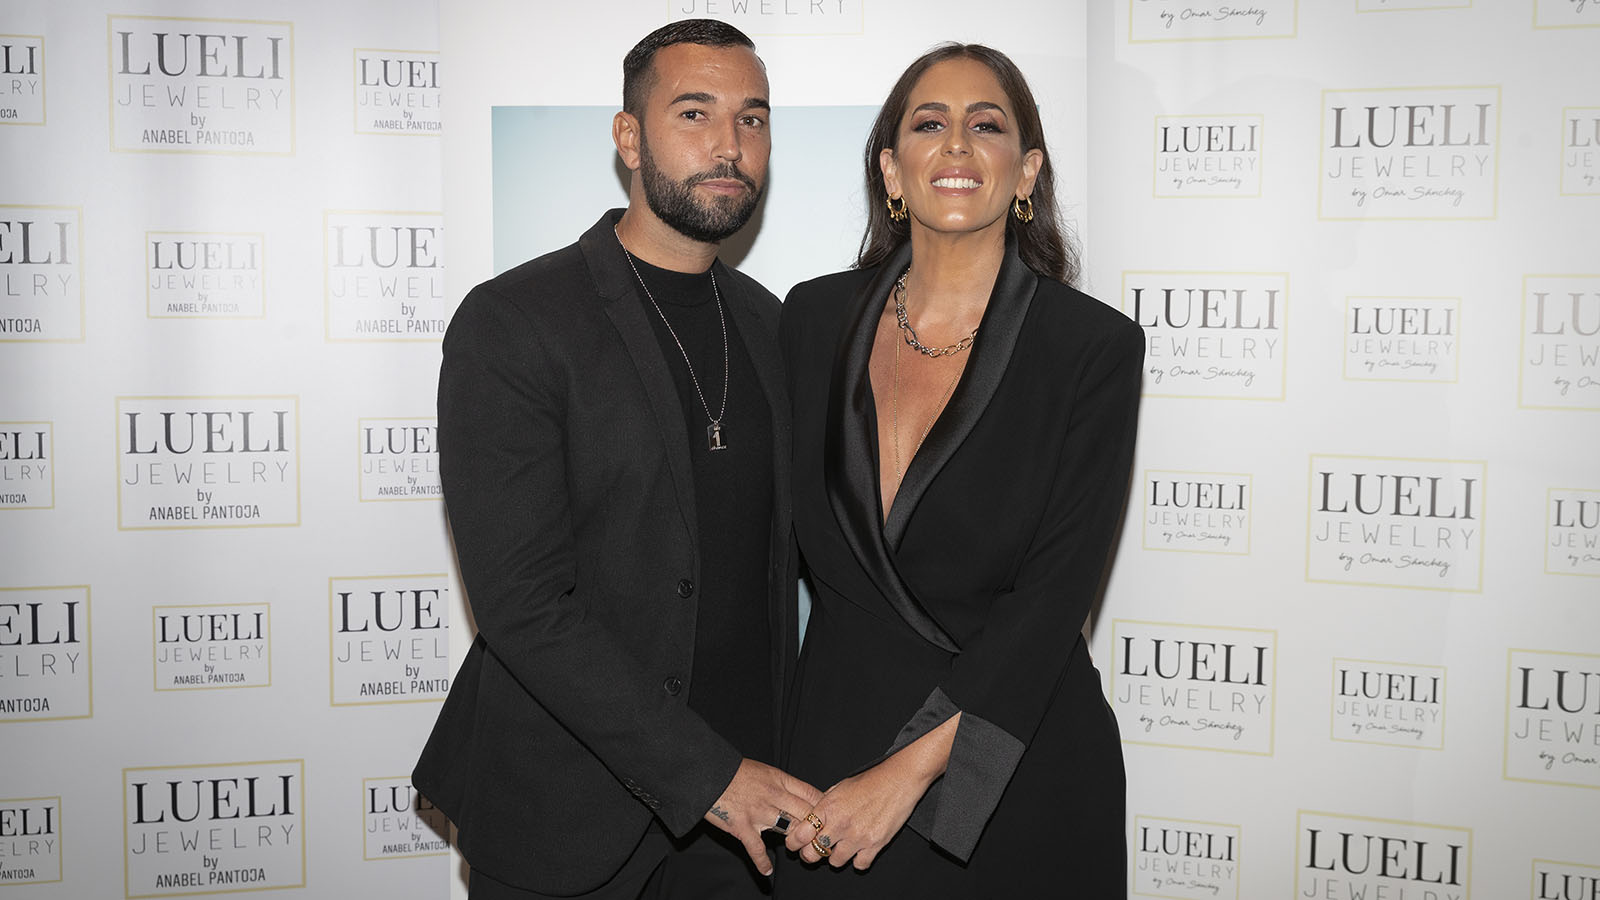 Anabel Pantoja and Omar Sanchez during presentation  firm Lueli by AnabelPantoja in Madrid on Wednesday, 17 November 2021.